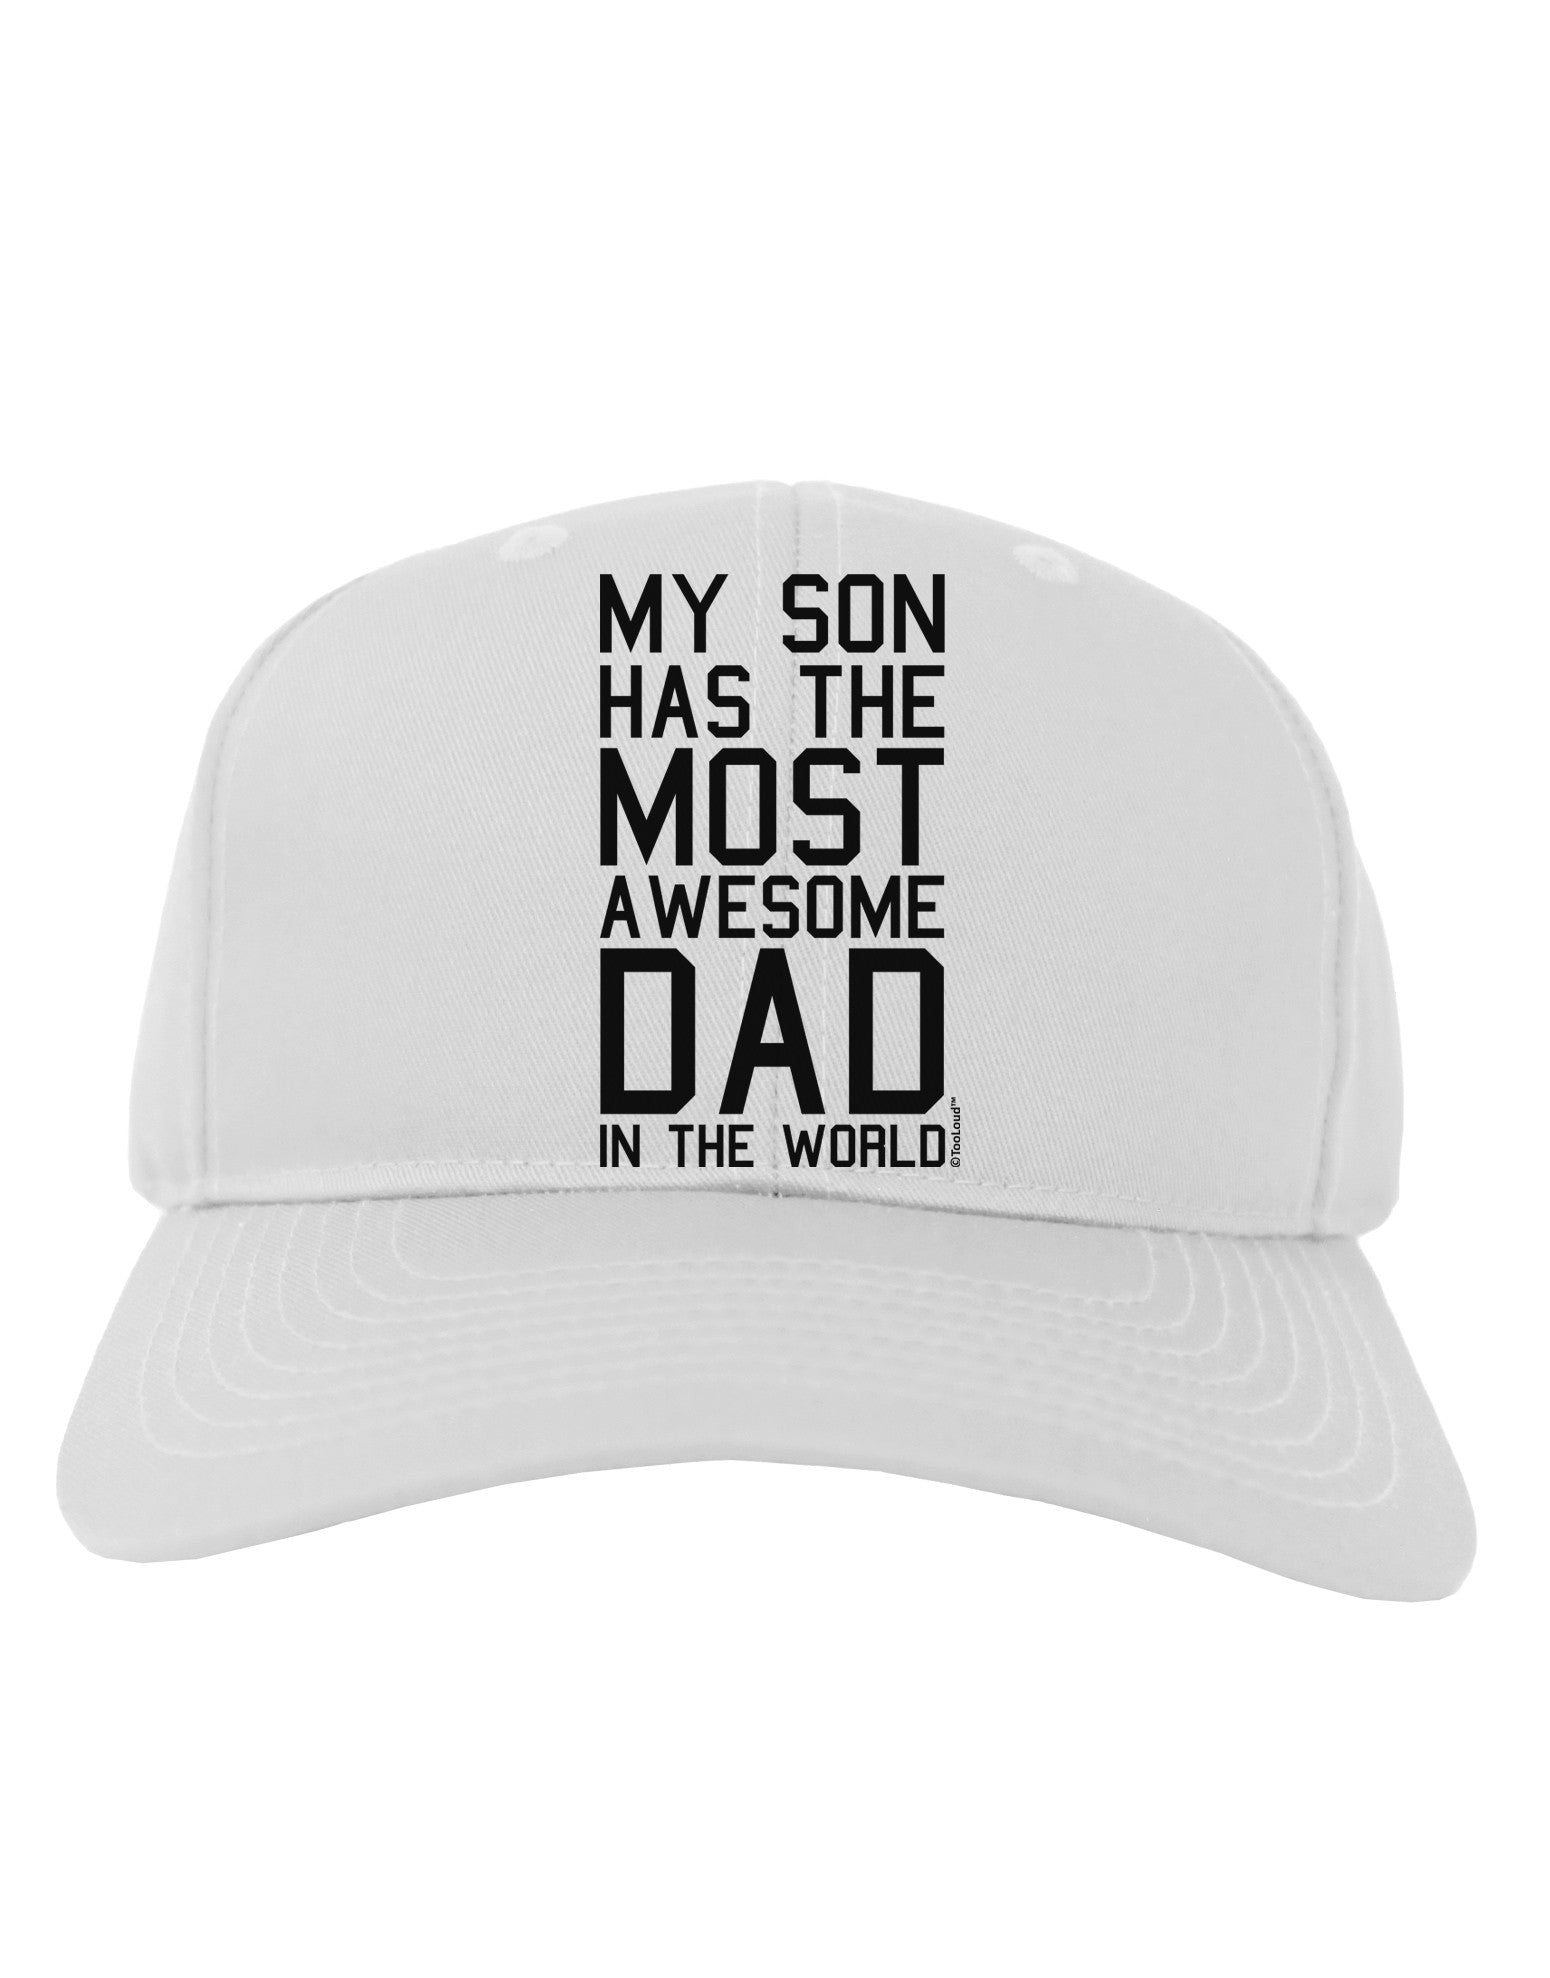 Most Epic Dad Father's Day Hats